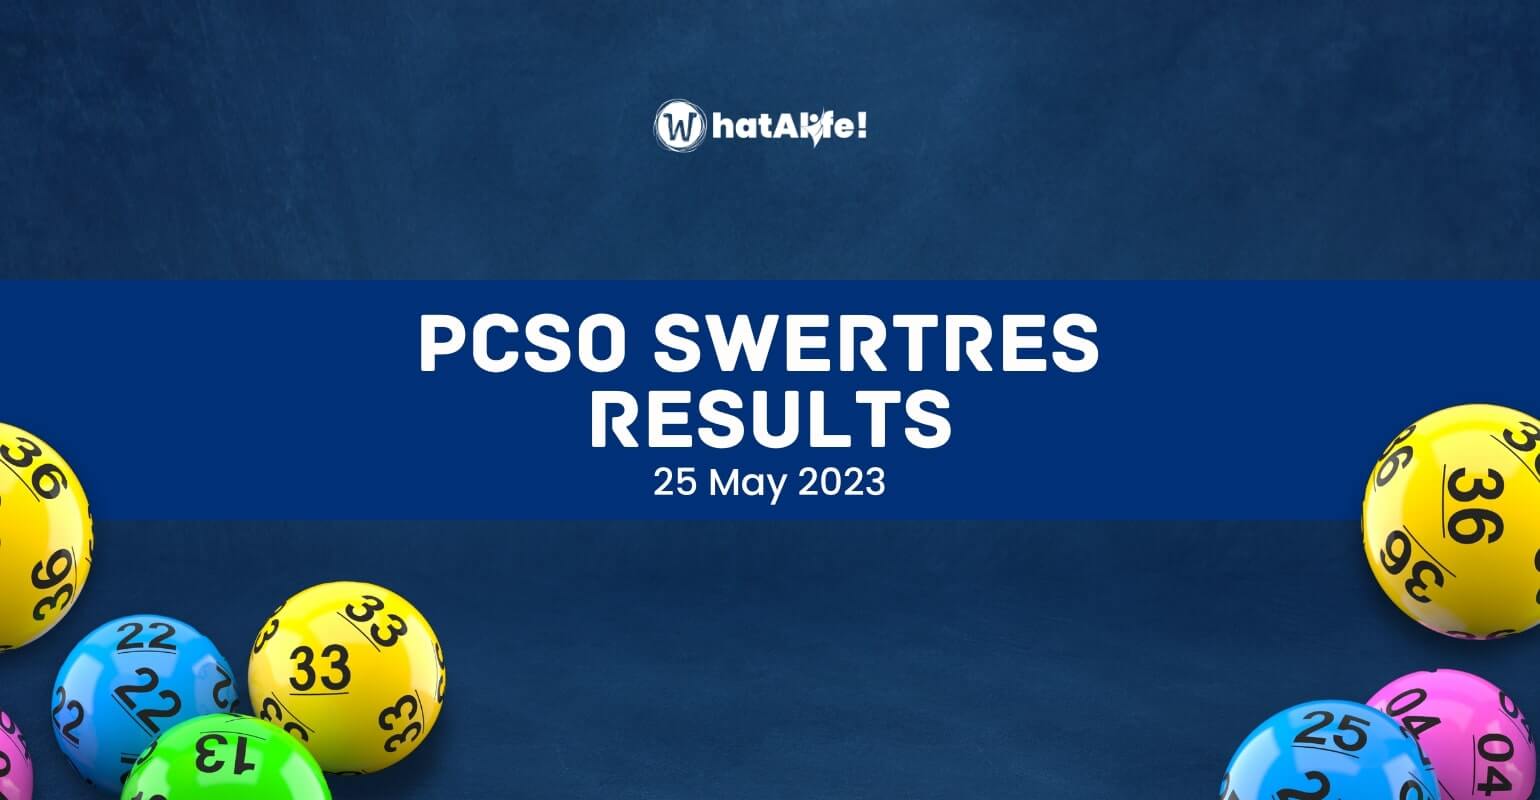 SWERTRES RESULTS May 25, 2023 (Thursday)